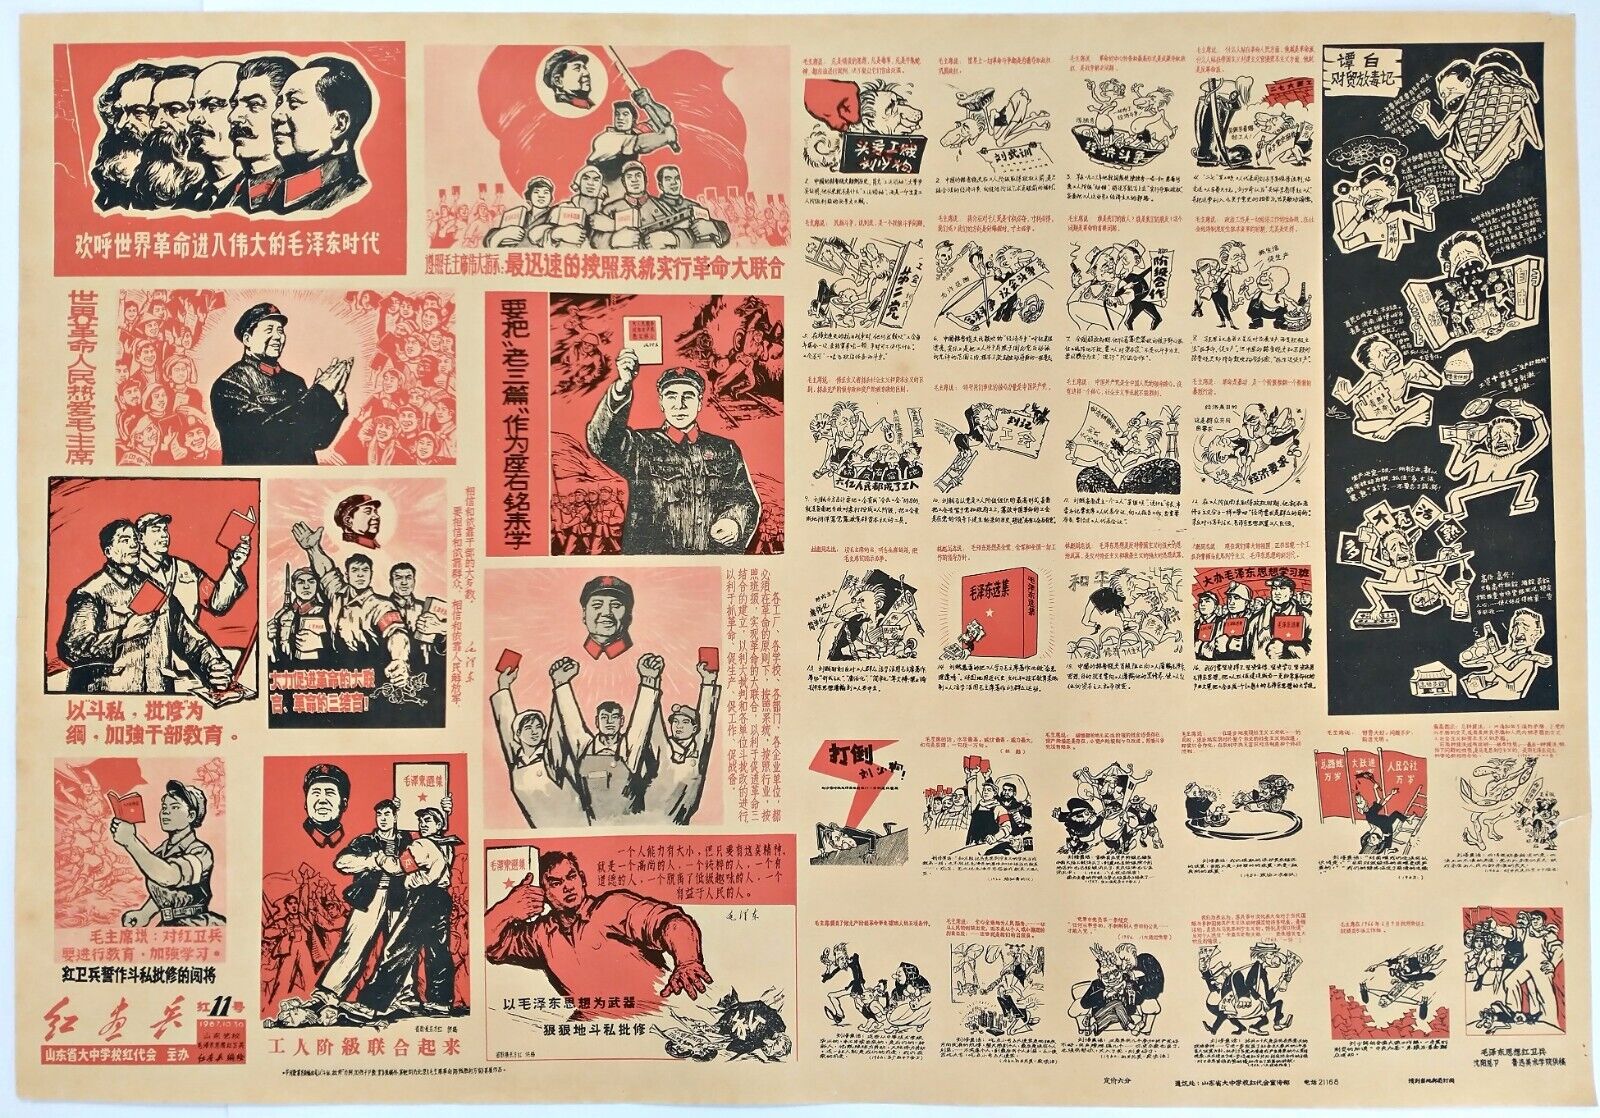 CHINESE CULTURAL REVOLUTION POSTER 60\'s VINTAGE - US SELLER - POSTER COLLAGE